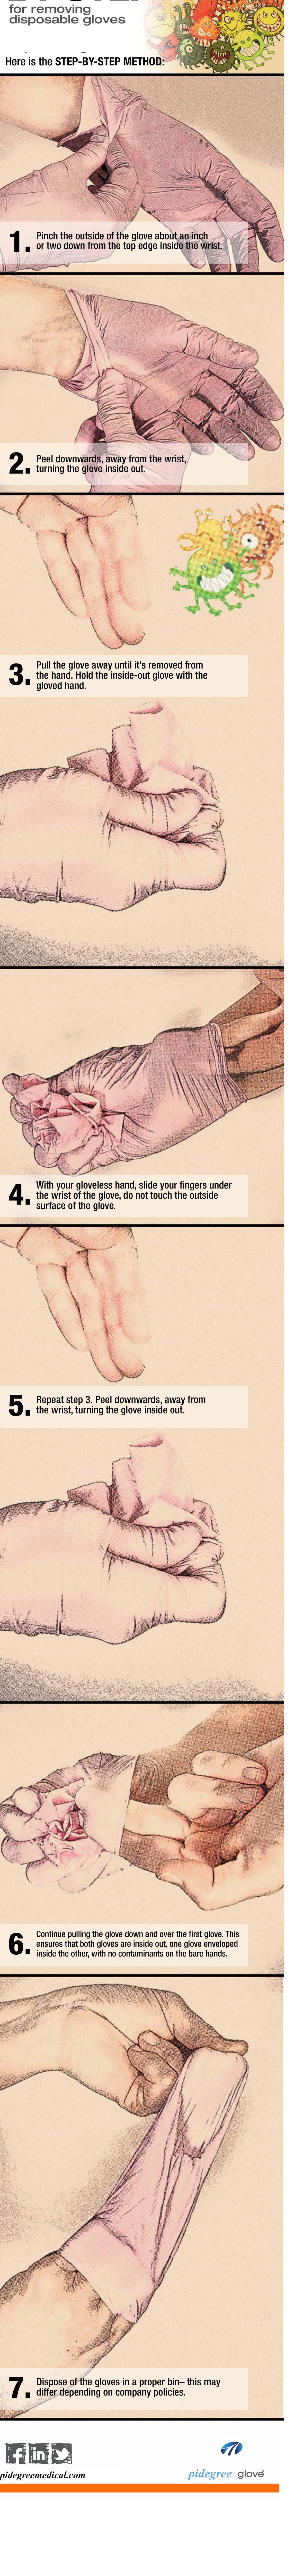 Step-by-Step-for-removing-disposable-glove.jpg